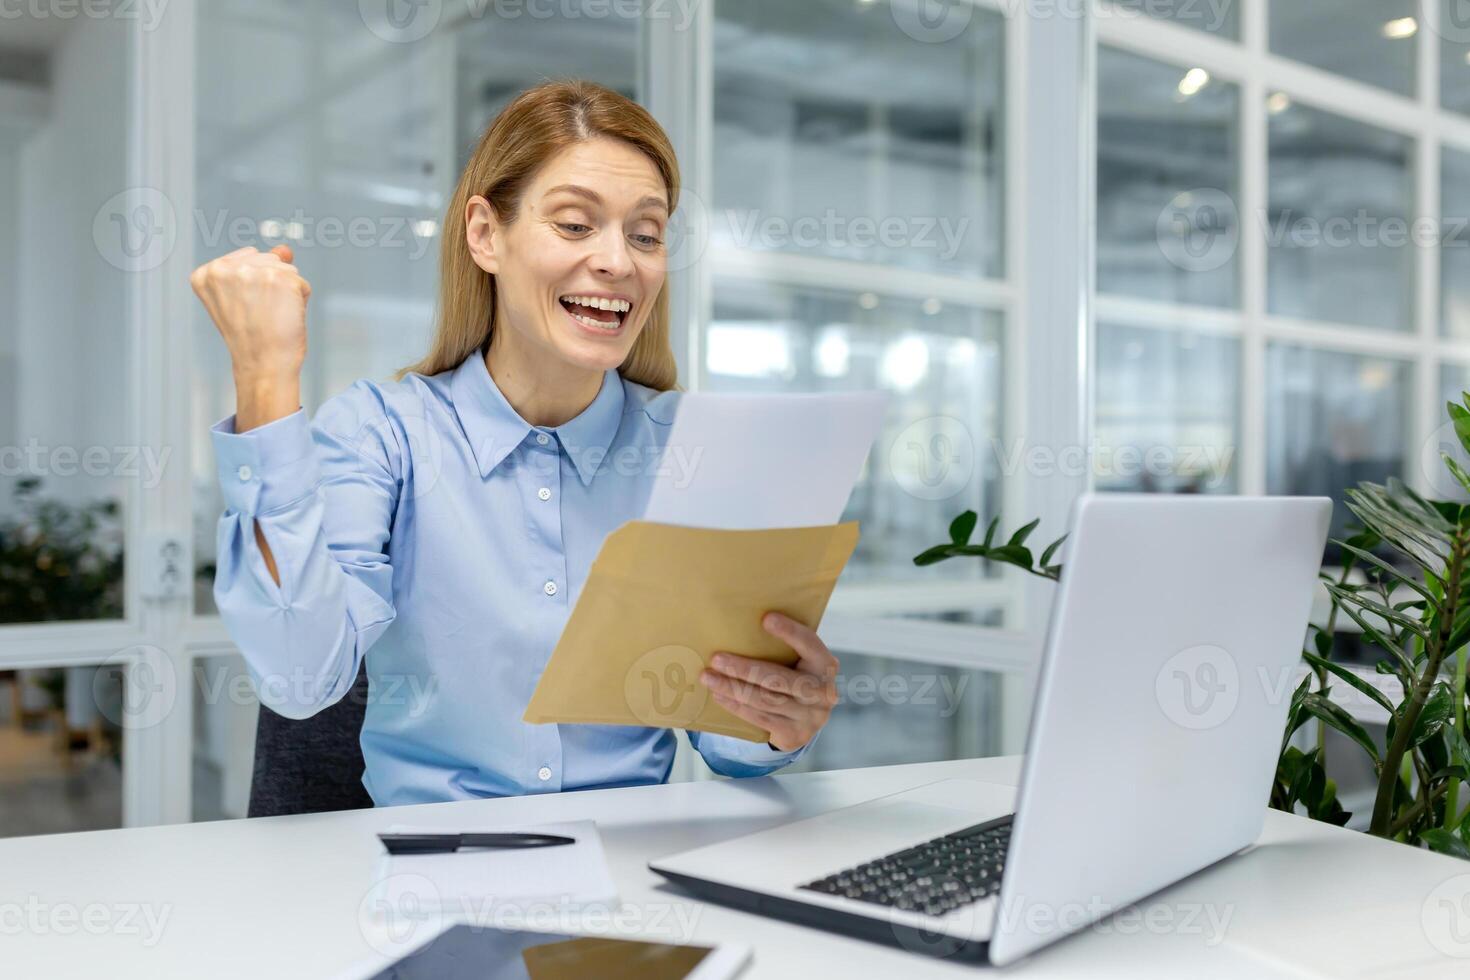 A joyful female office worker celebrates success with an envelope in a modern workspace, evoking feelings of achievement and happiness. photo